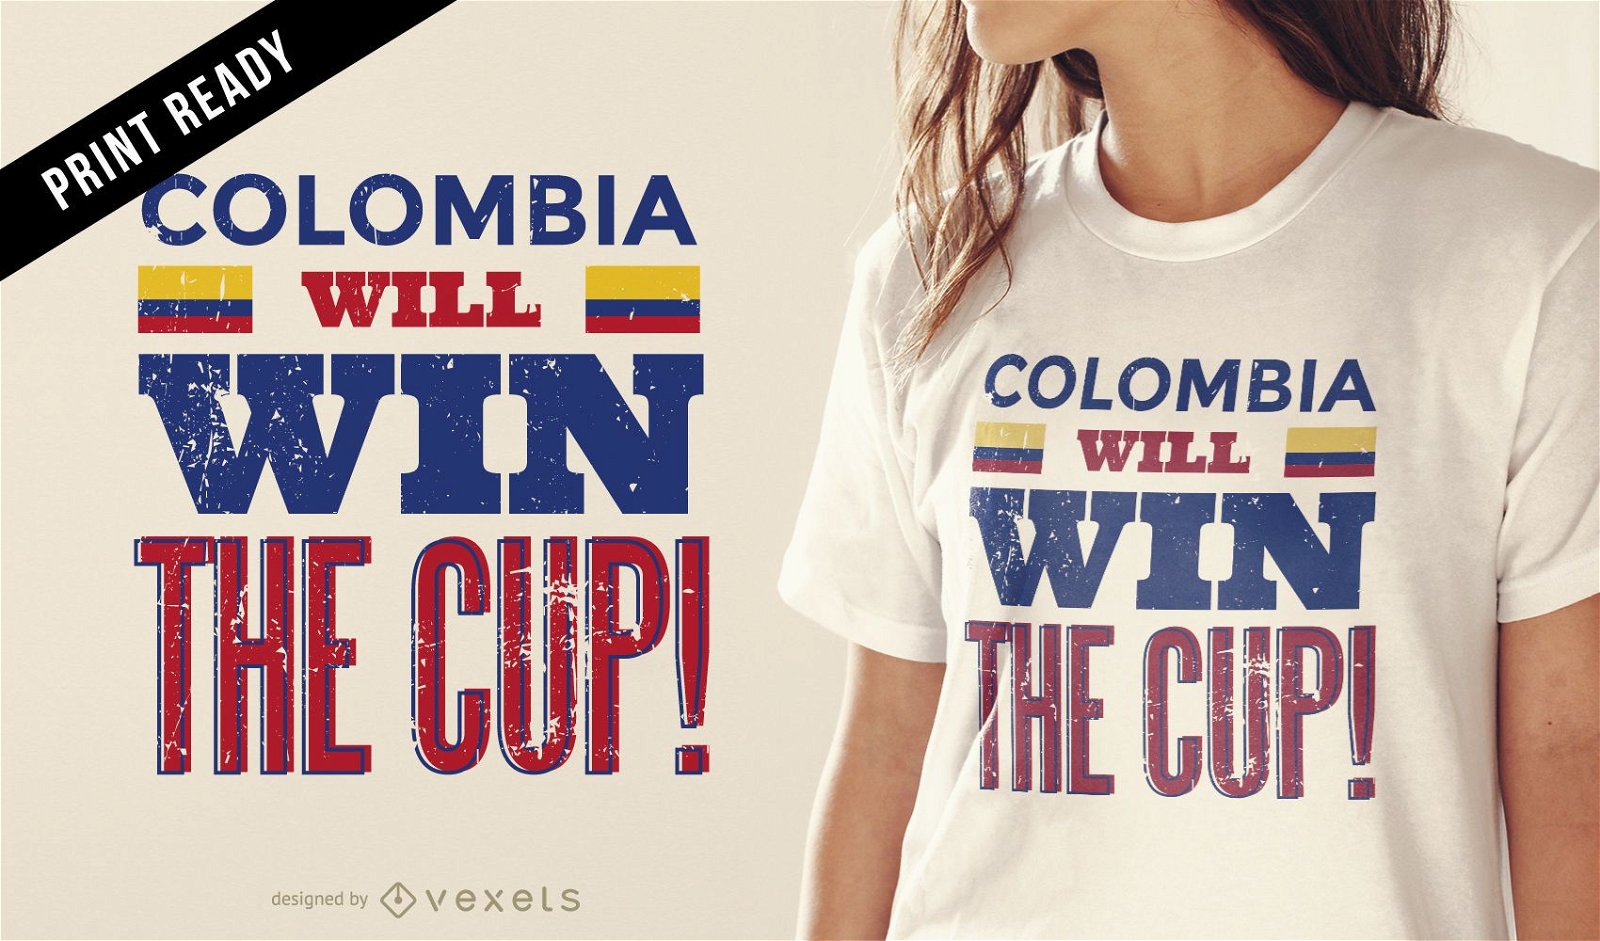 Russia Cup Colombia t-shirt design